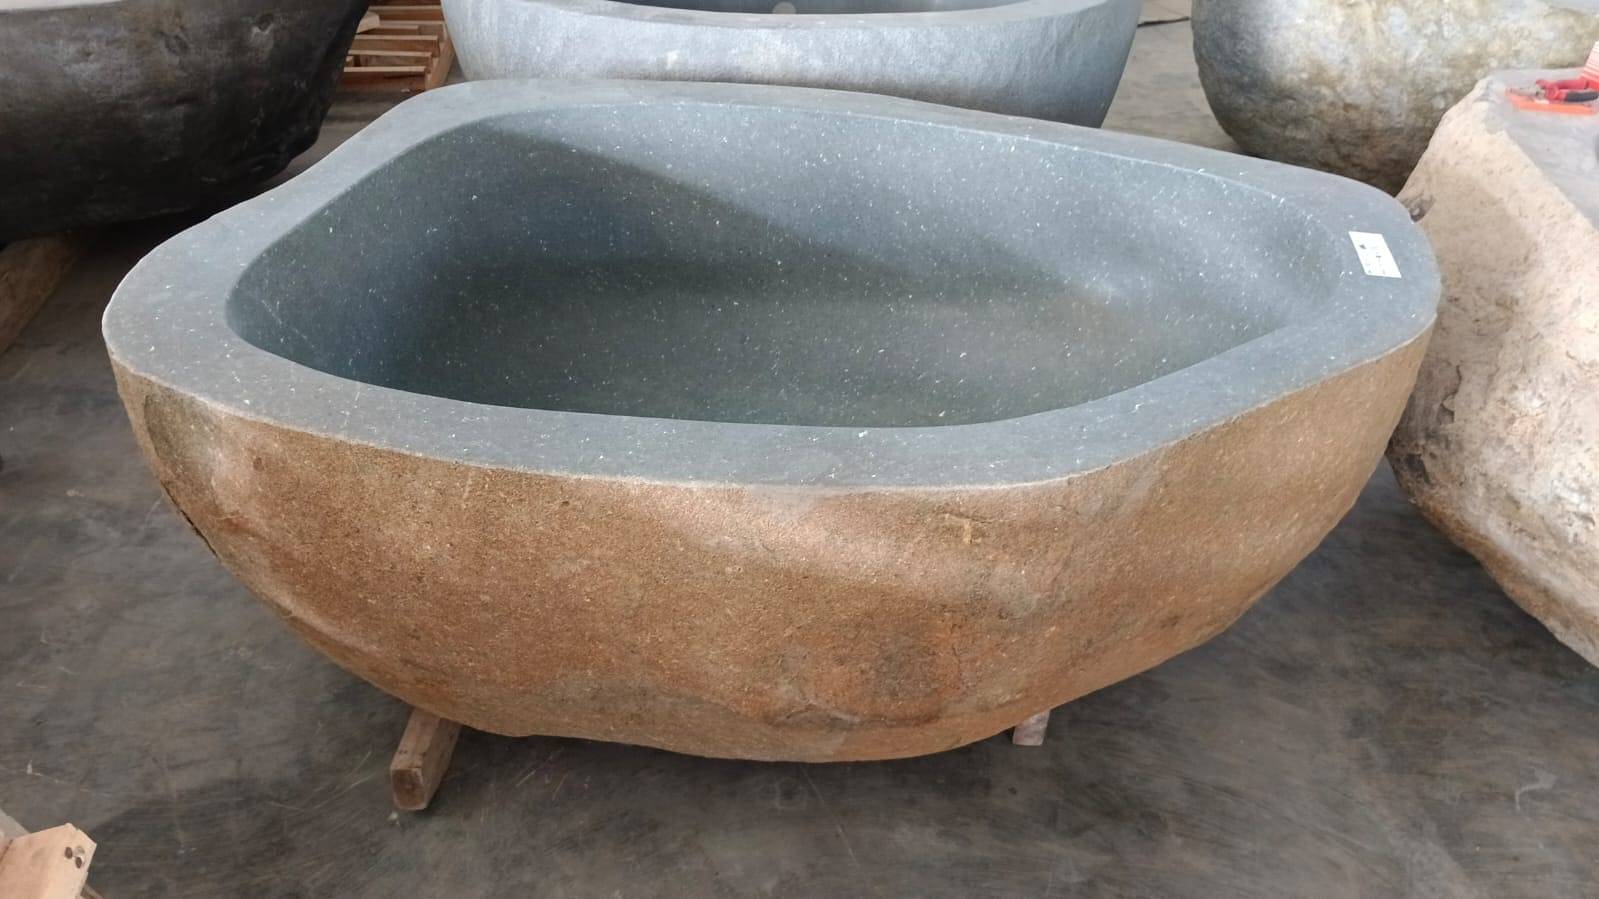 Stone sink in the shop